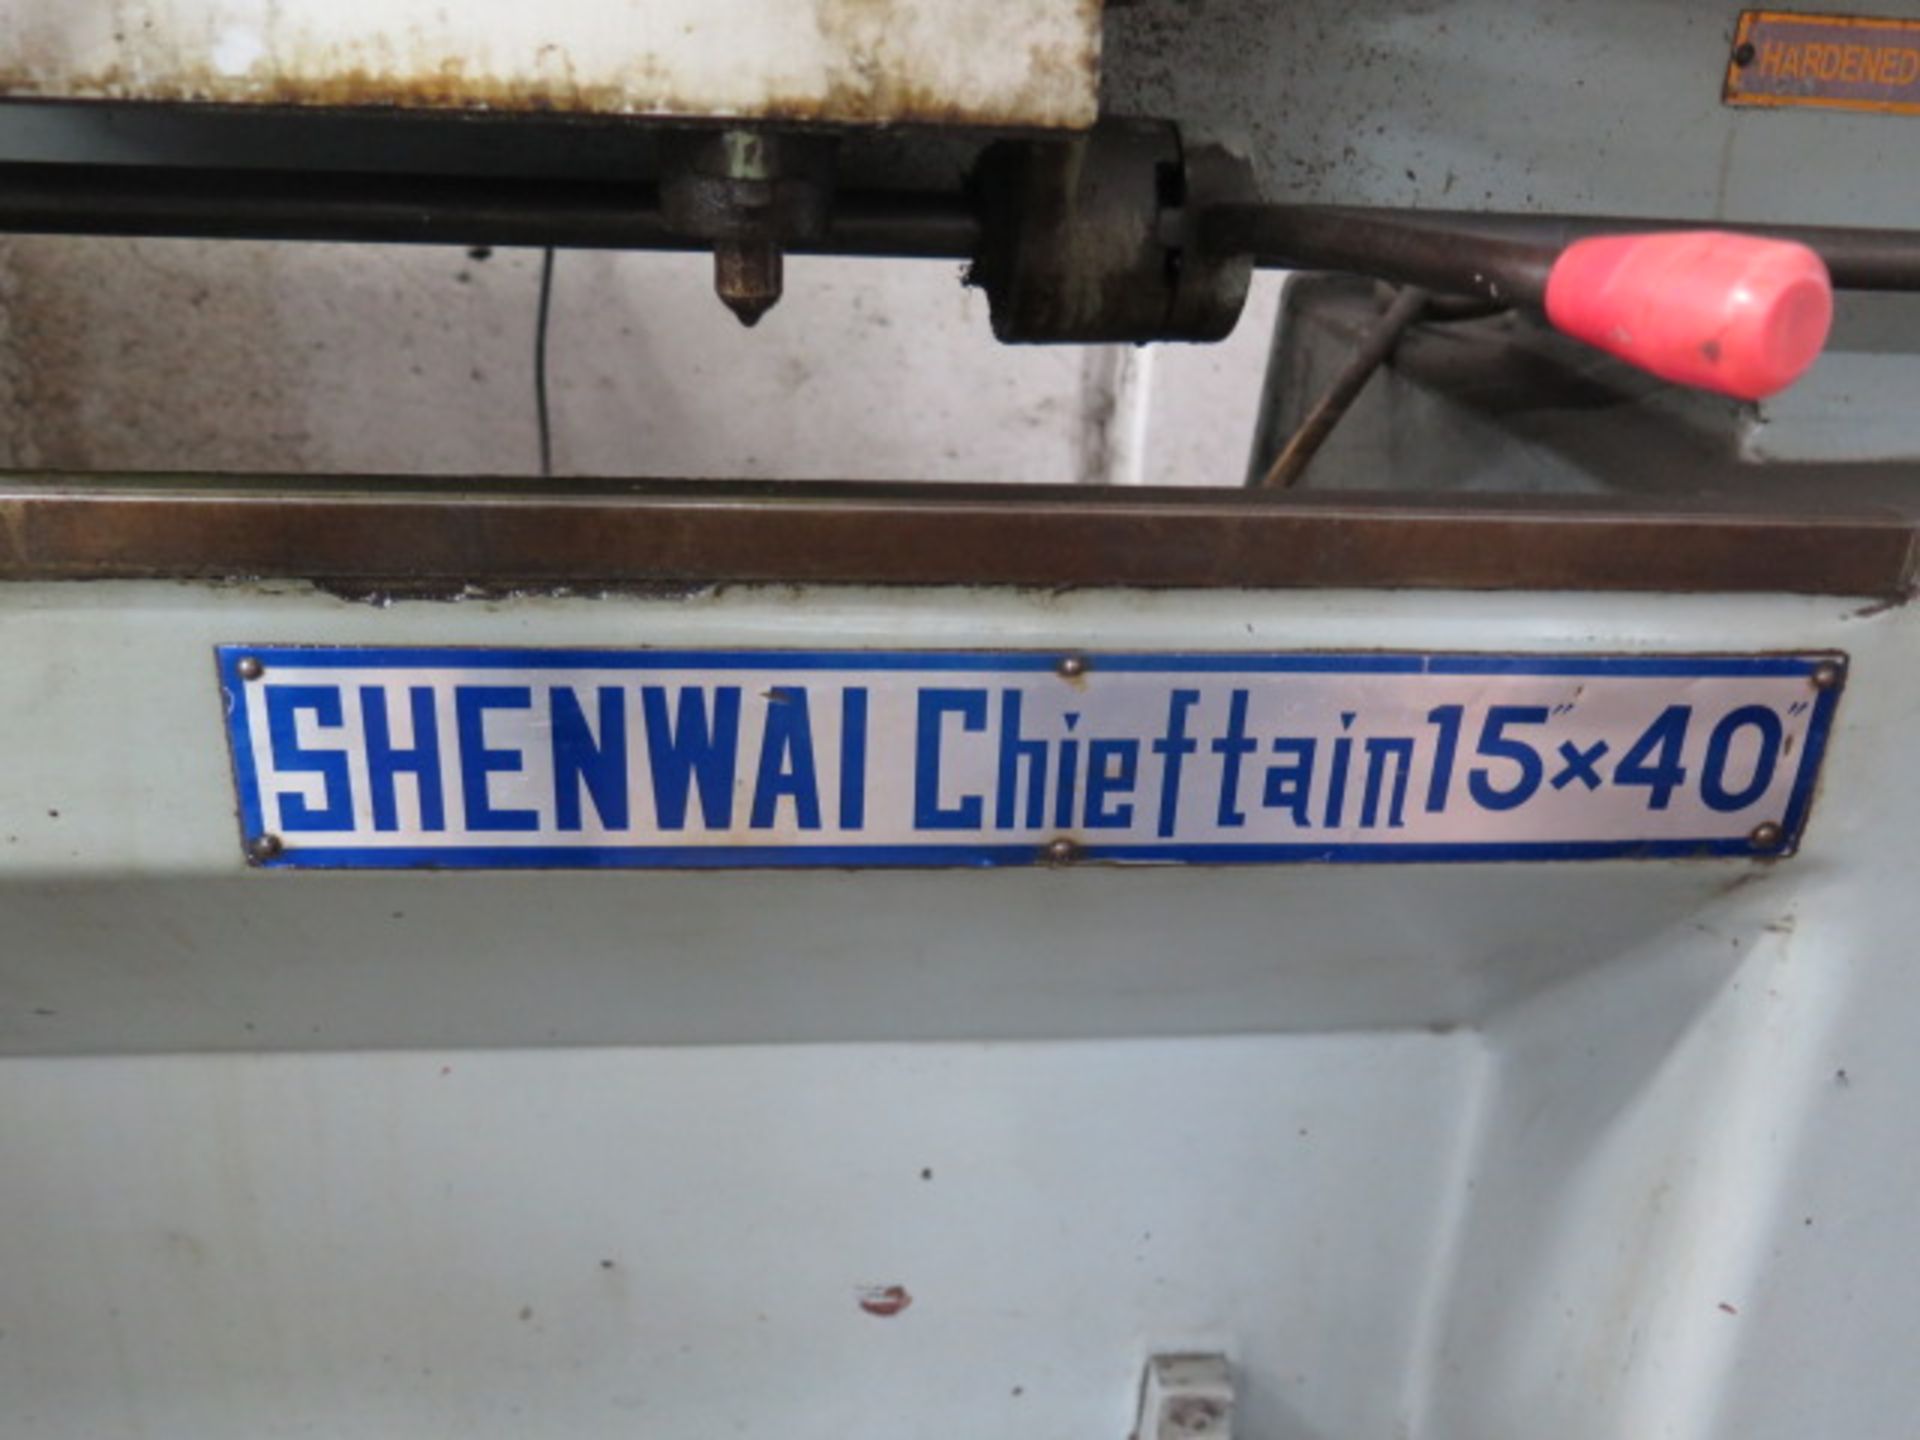 SW Shenwai “Chieftain” 15” x 40” Geared Head Gap Lathe s/n 10449 w/ 40-1800 RPM, Inch/mm, SOLD AS IS - Image 10 of 12